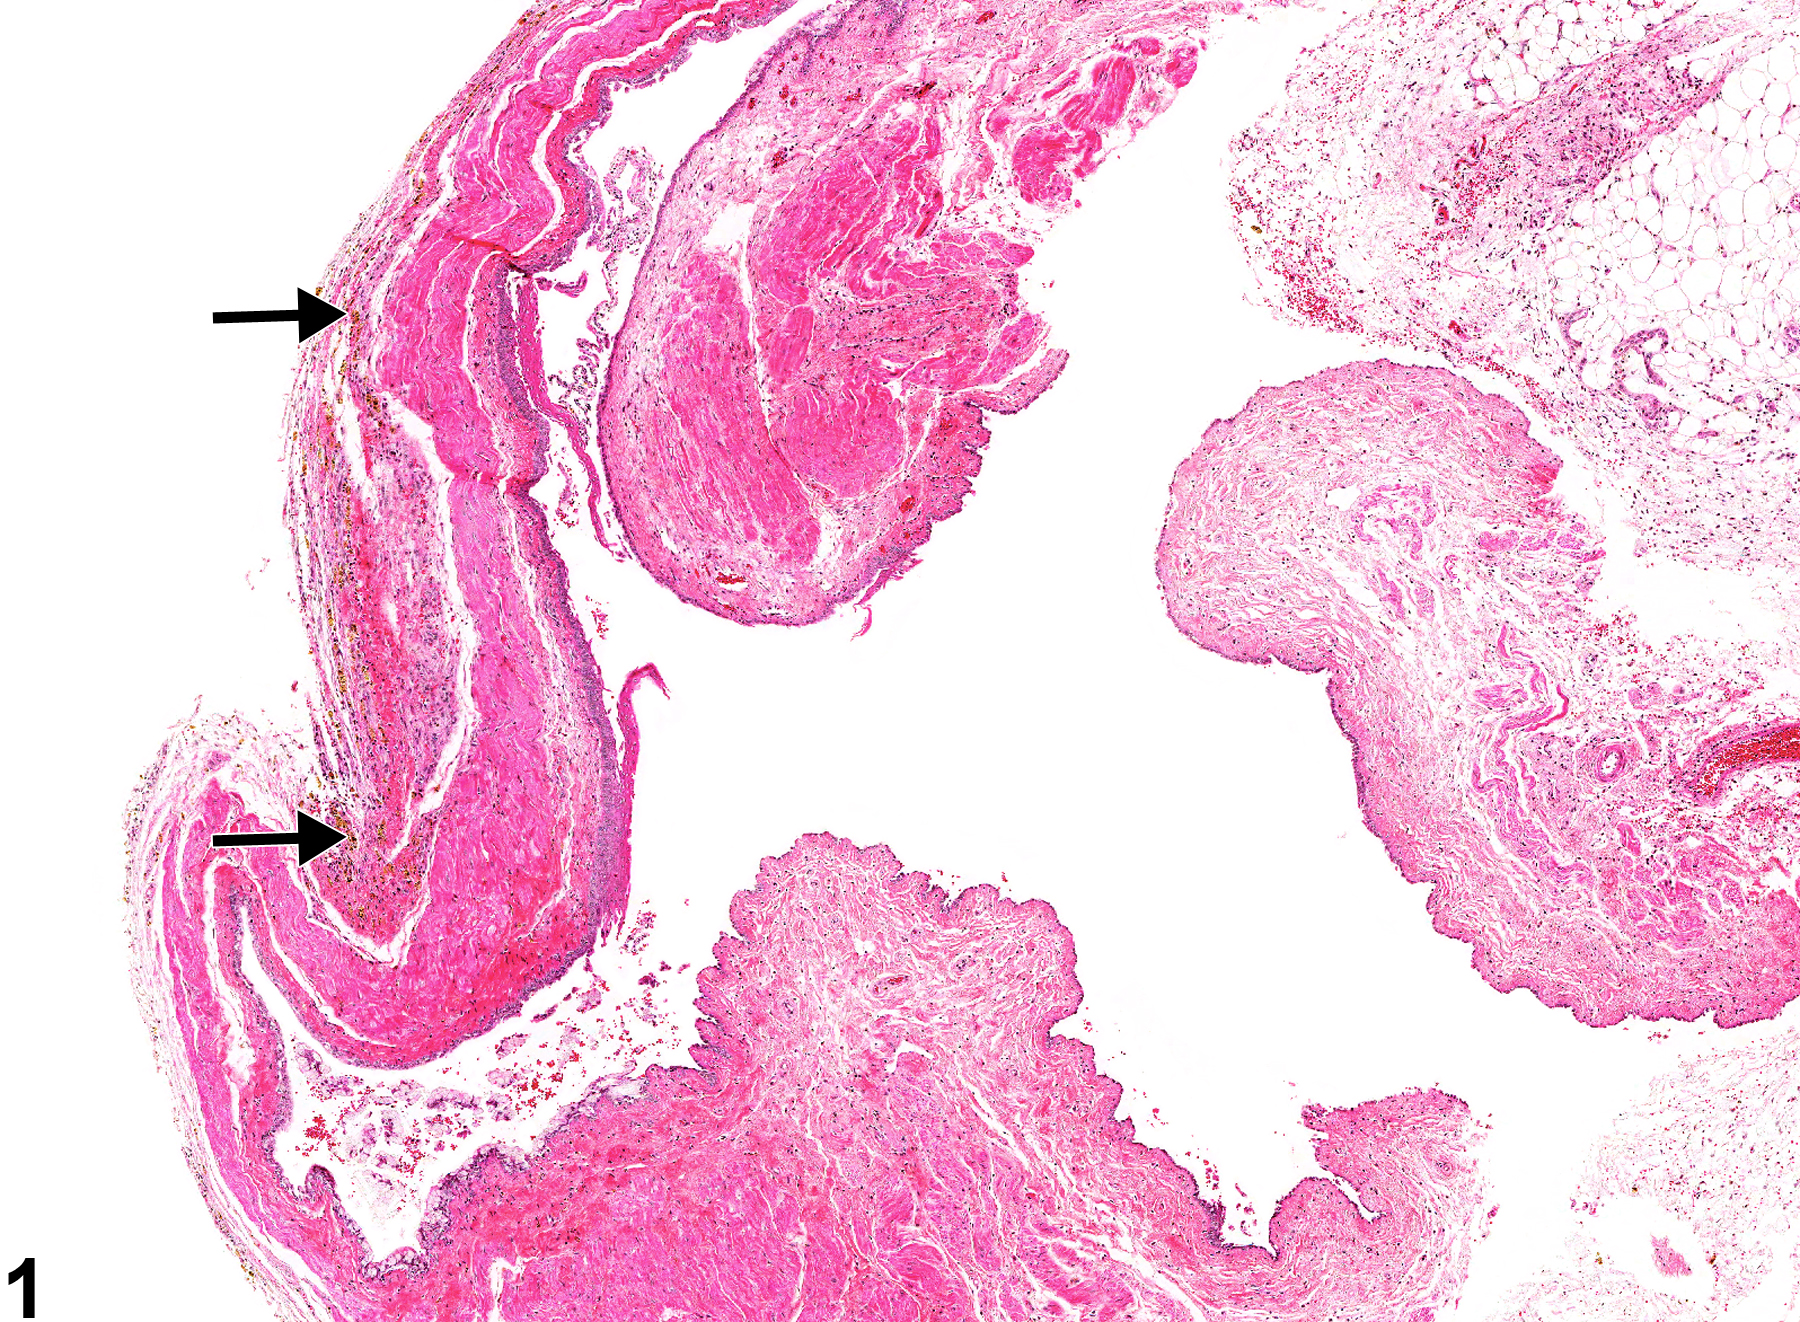 Image of pigment in the vagina from a female F344/N rat in a chronic study